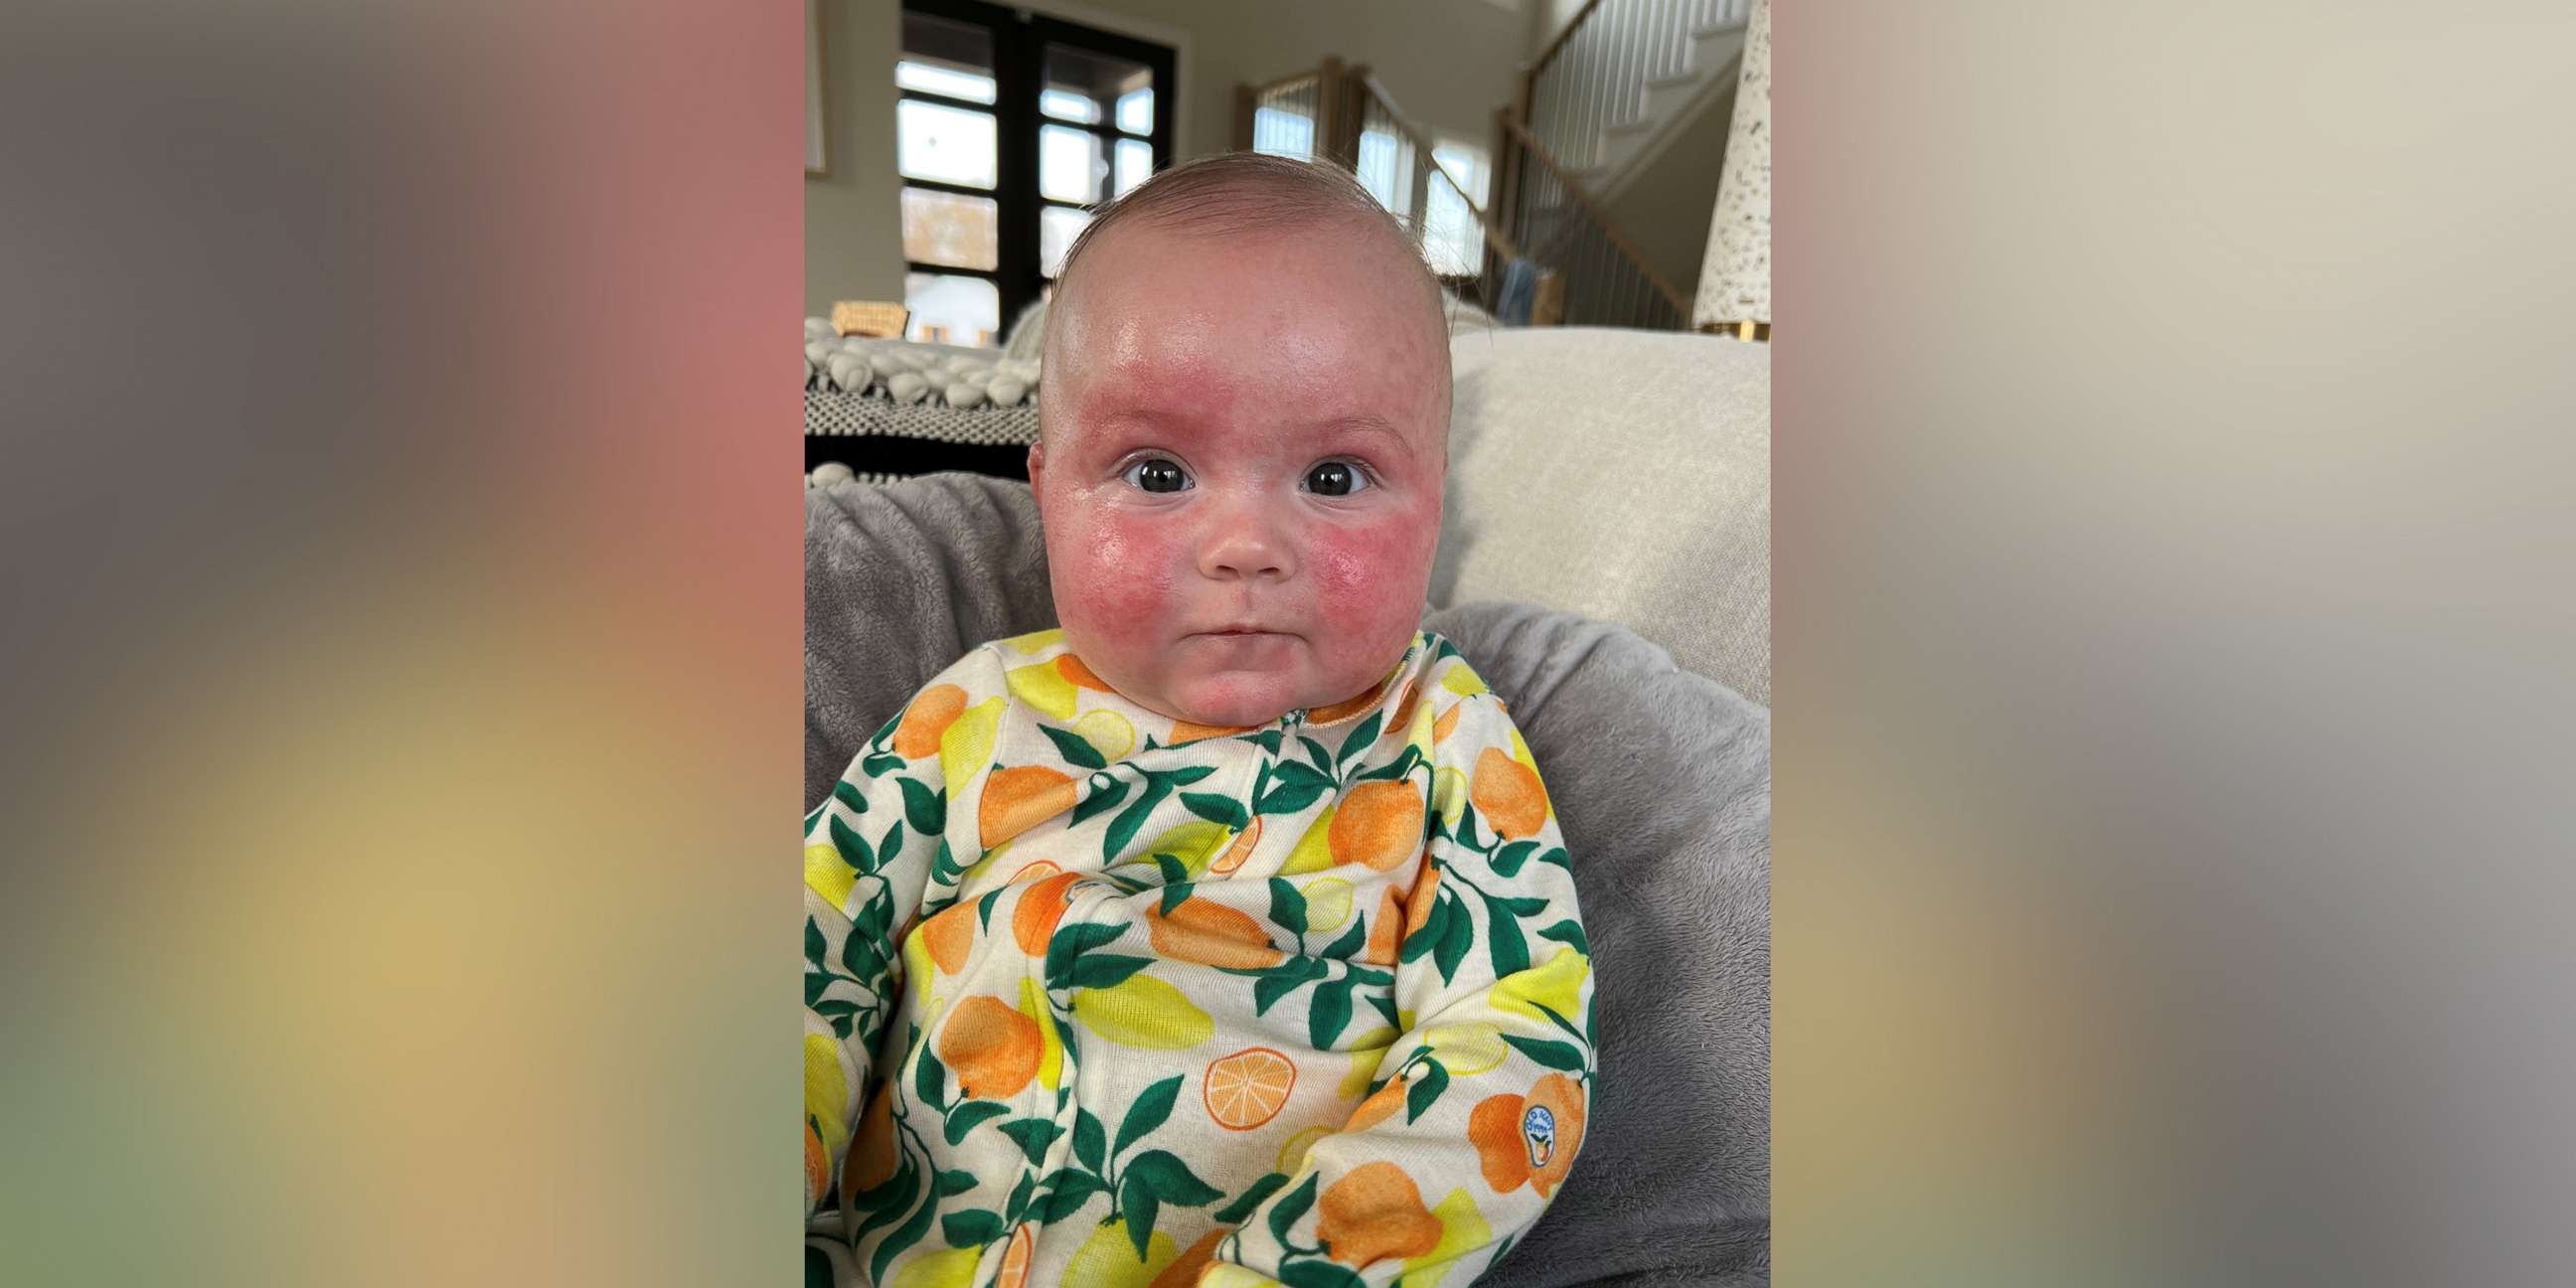 PHOTO: According to Weedman, Palmer gets a "severe" form of eczema after consuming milk protein, which can present as facial boils that then turn into scabs.